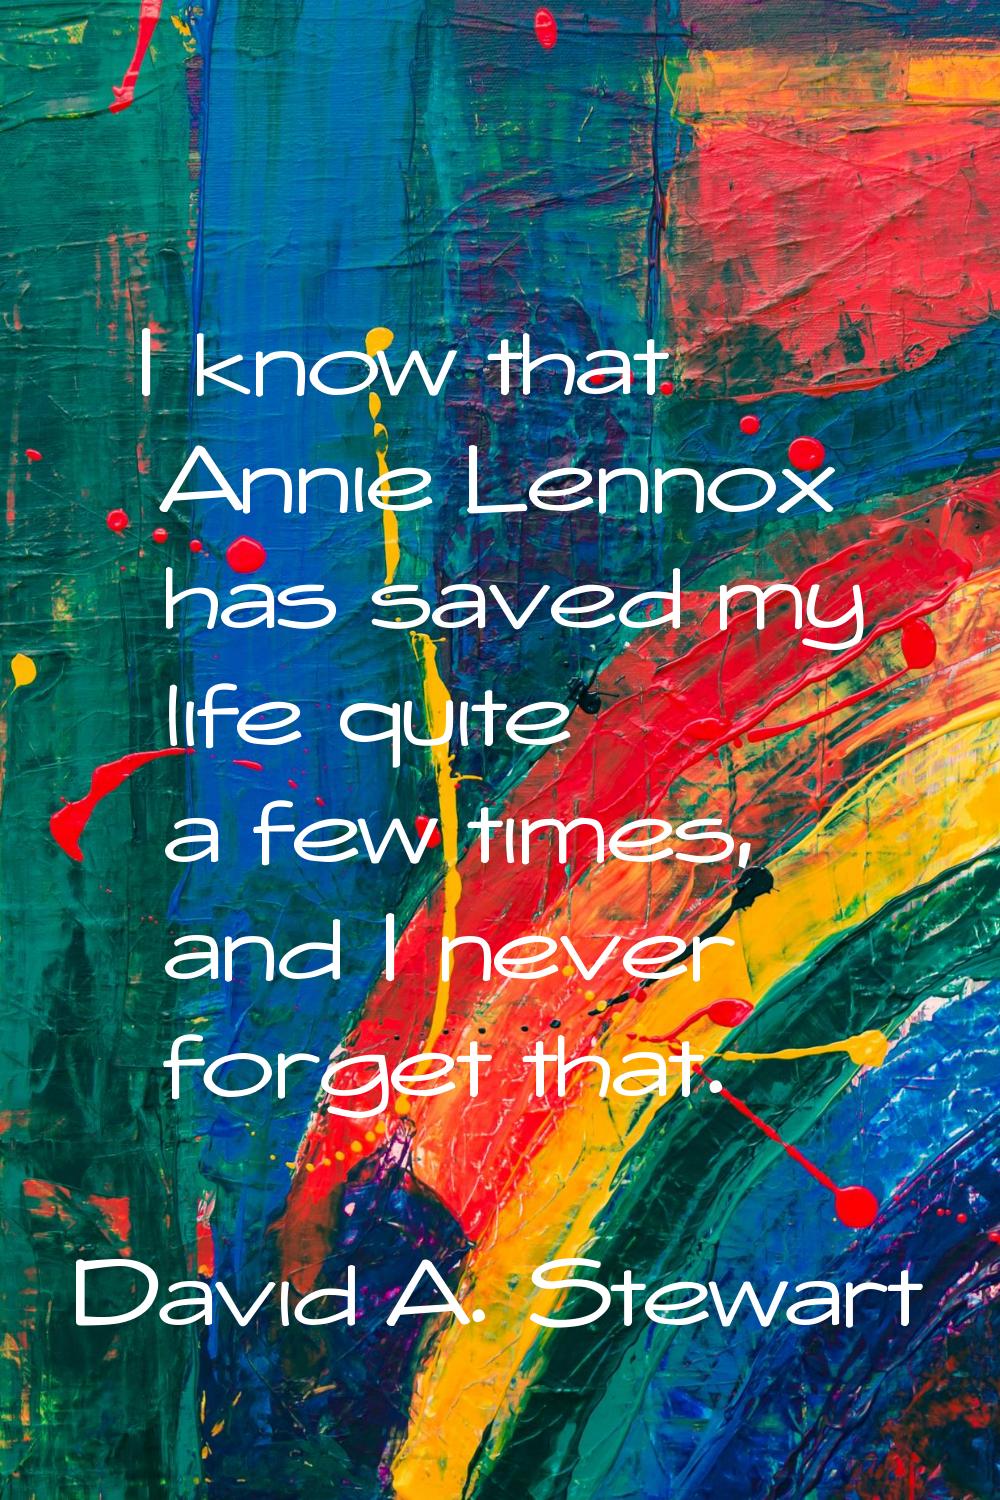 I know that Annie Lennox has saved my life quite a few times, and I never forget that.